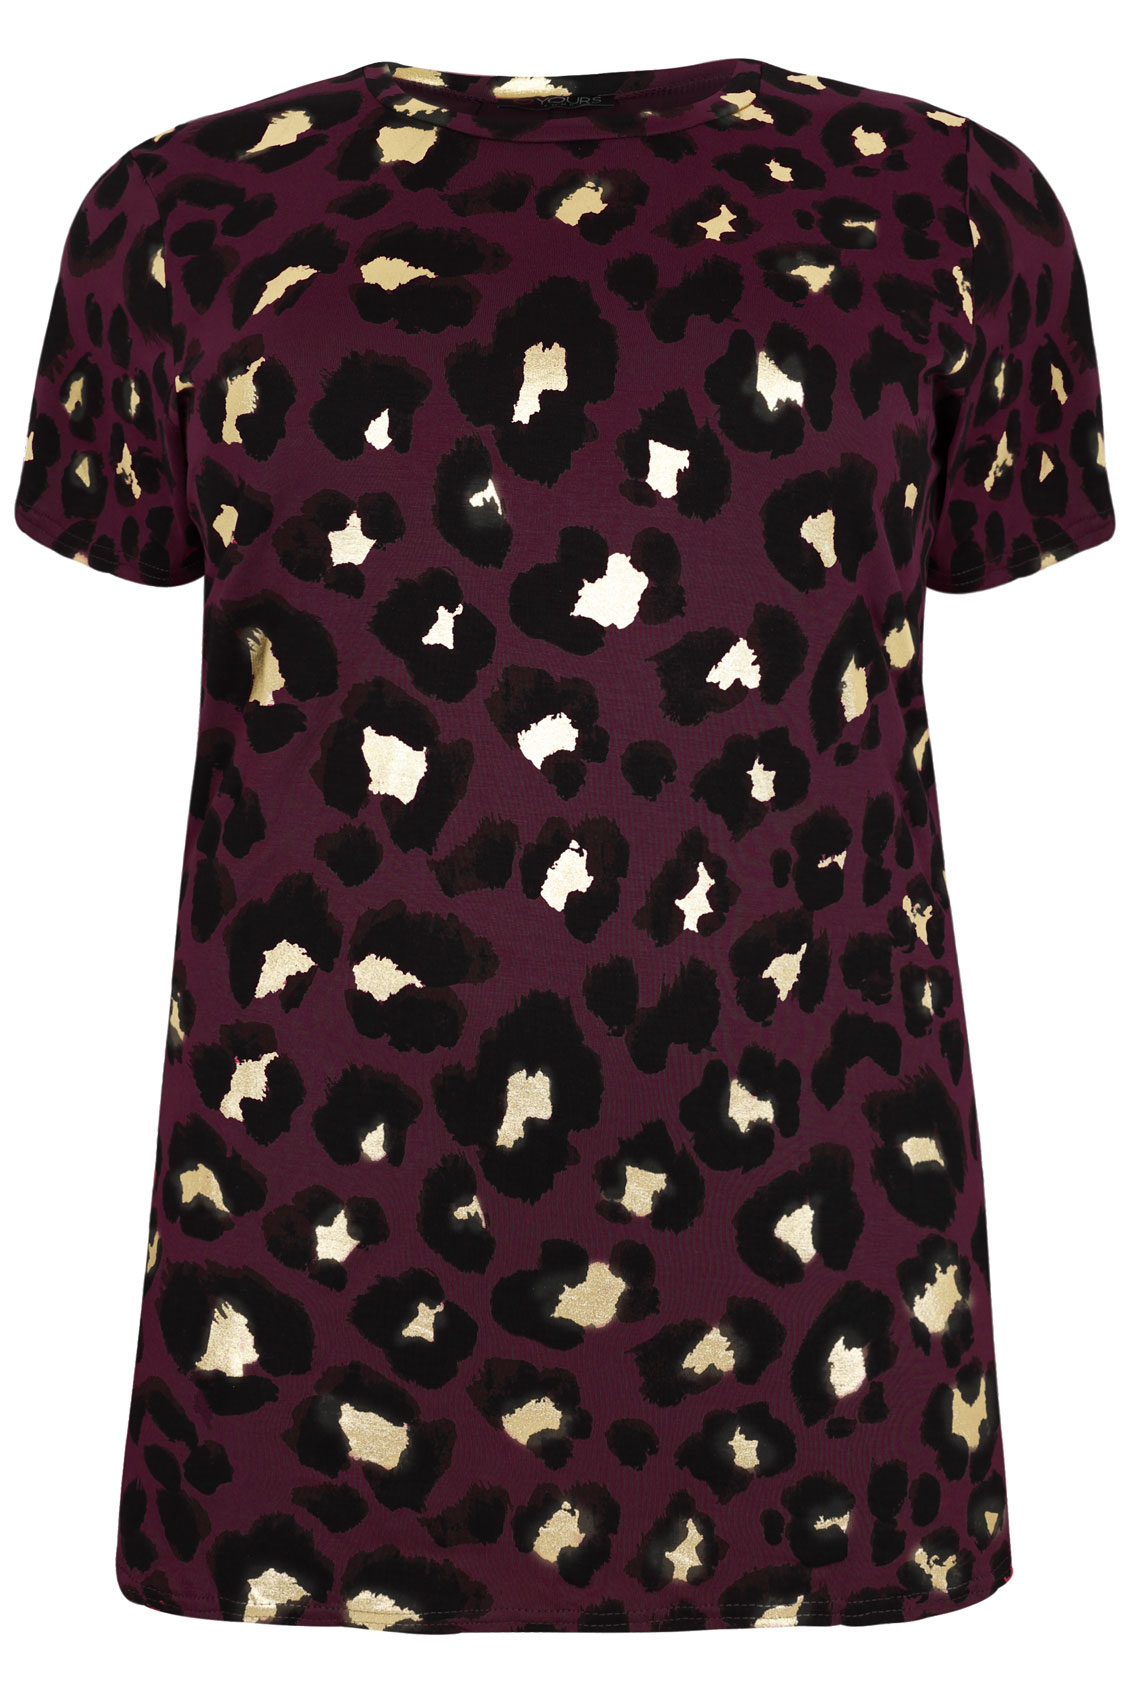 Wine, Black & Gold Leopard Print Top With Side Slits Plus Size 16 to 32